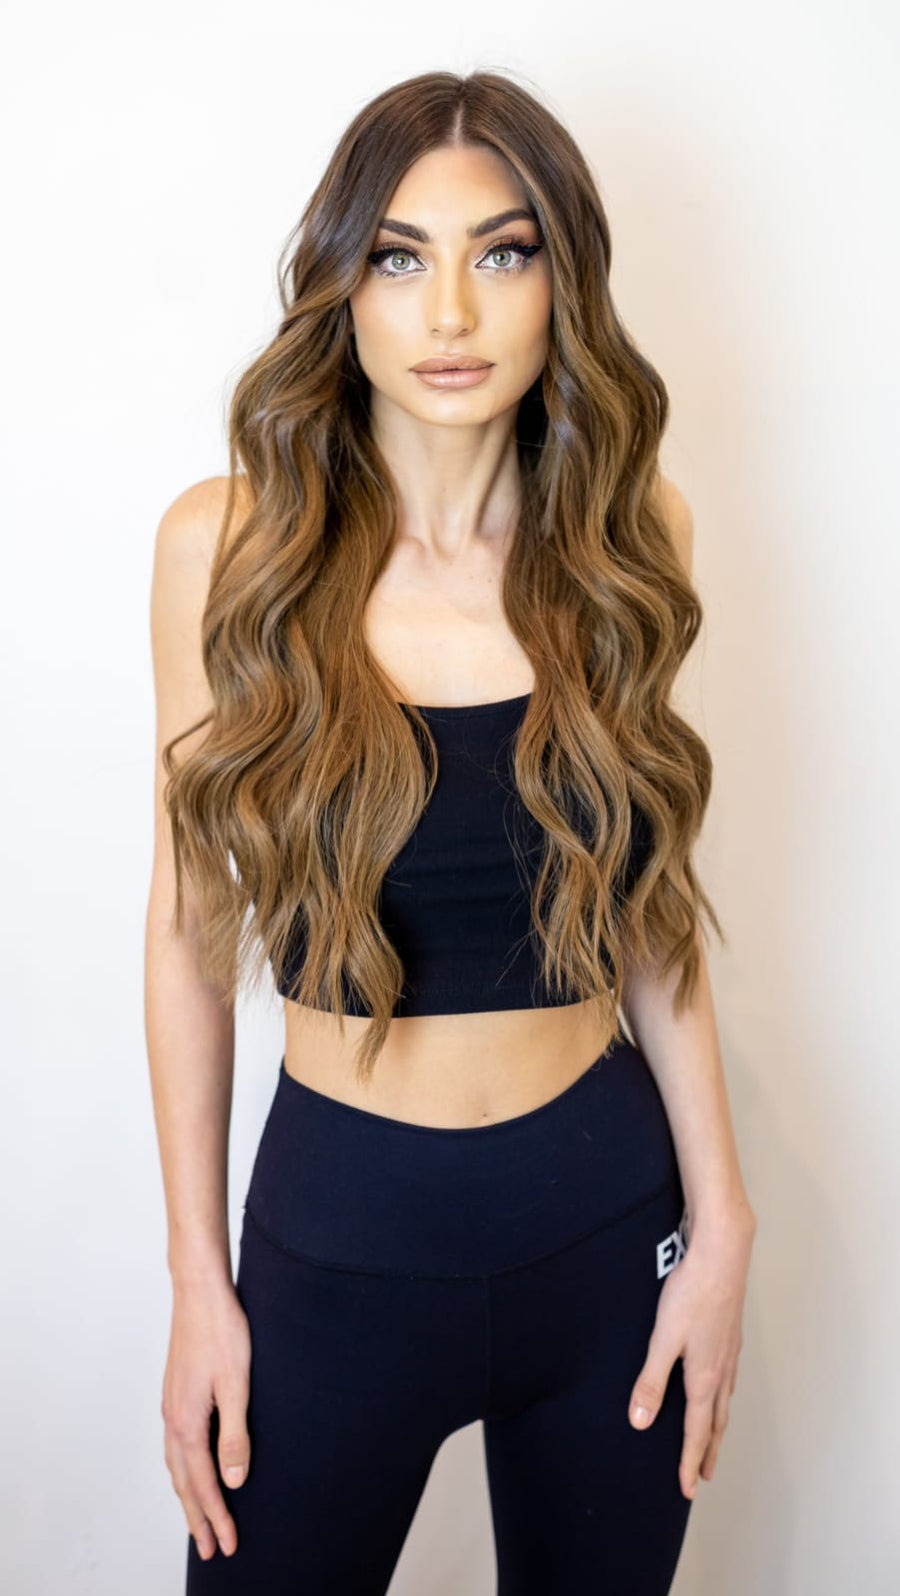 Luxury Tape Hair Extensions - 24 Inch